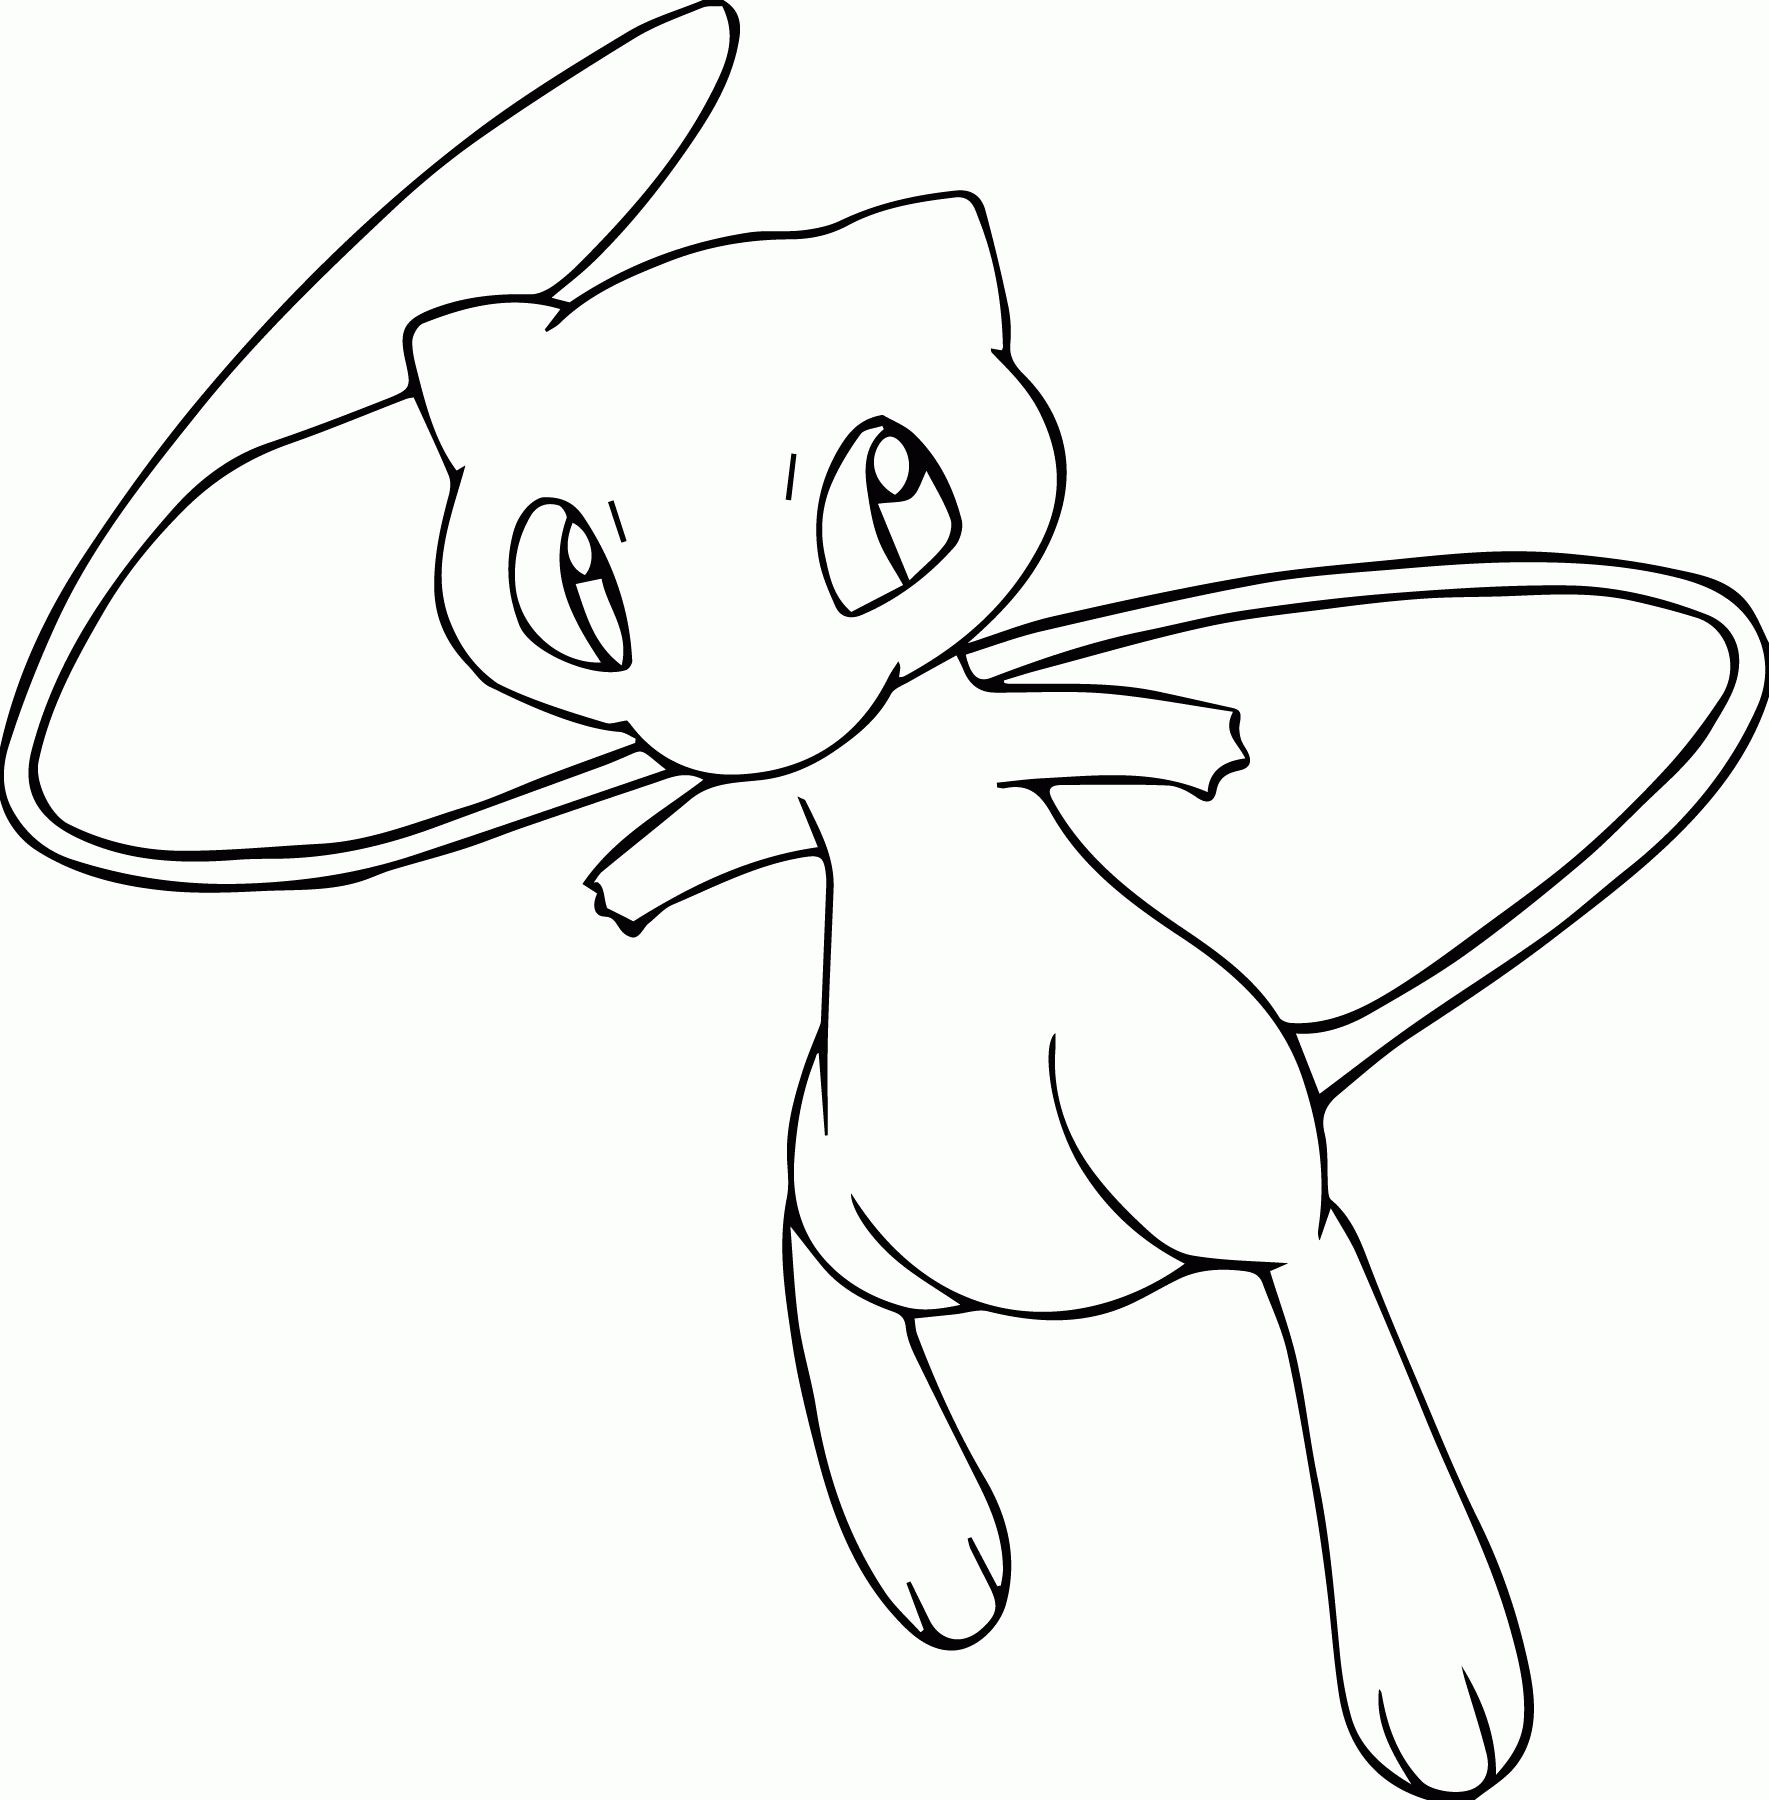 Pokemon Mew Coloring Pages Free High Quality